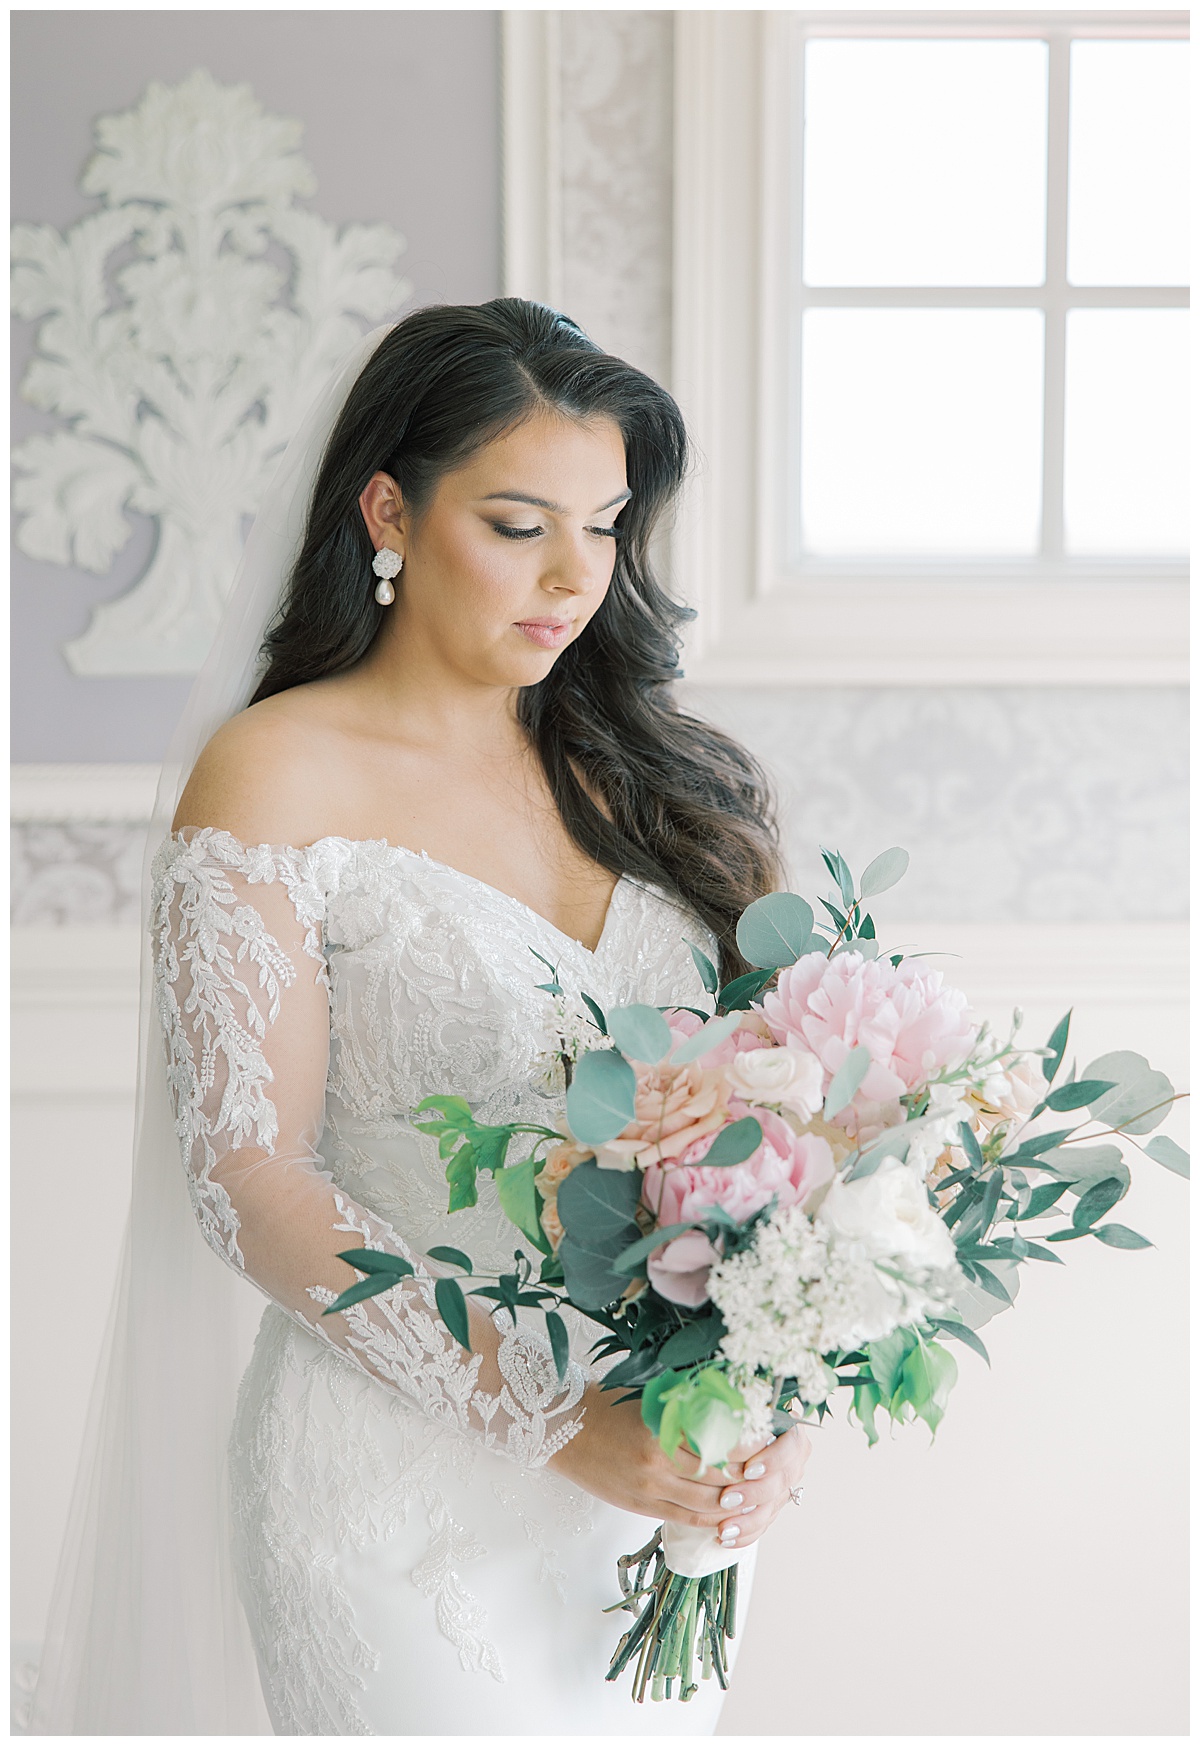 Bride with lace sleeves looking at bouquet with greenery and pink peonies. 